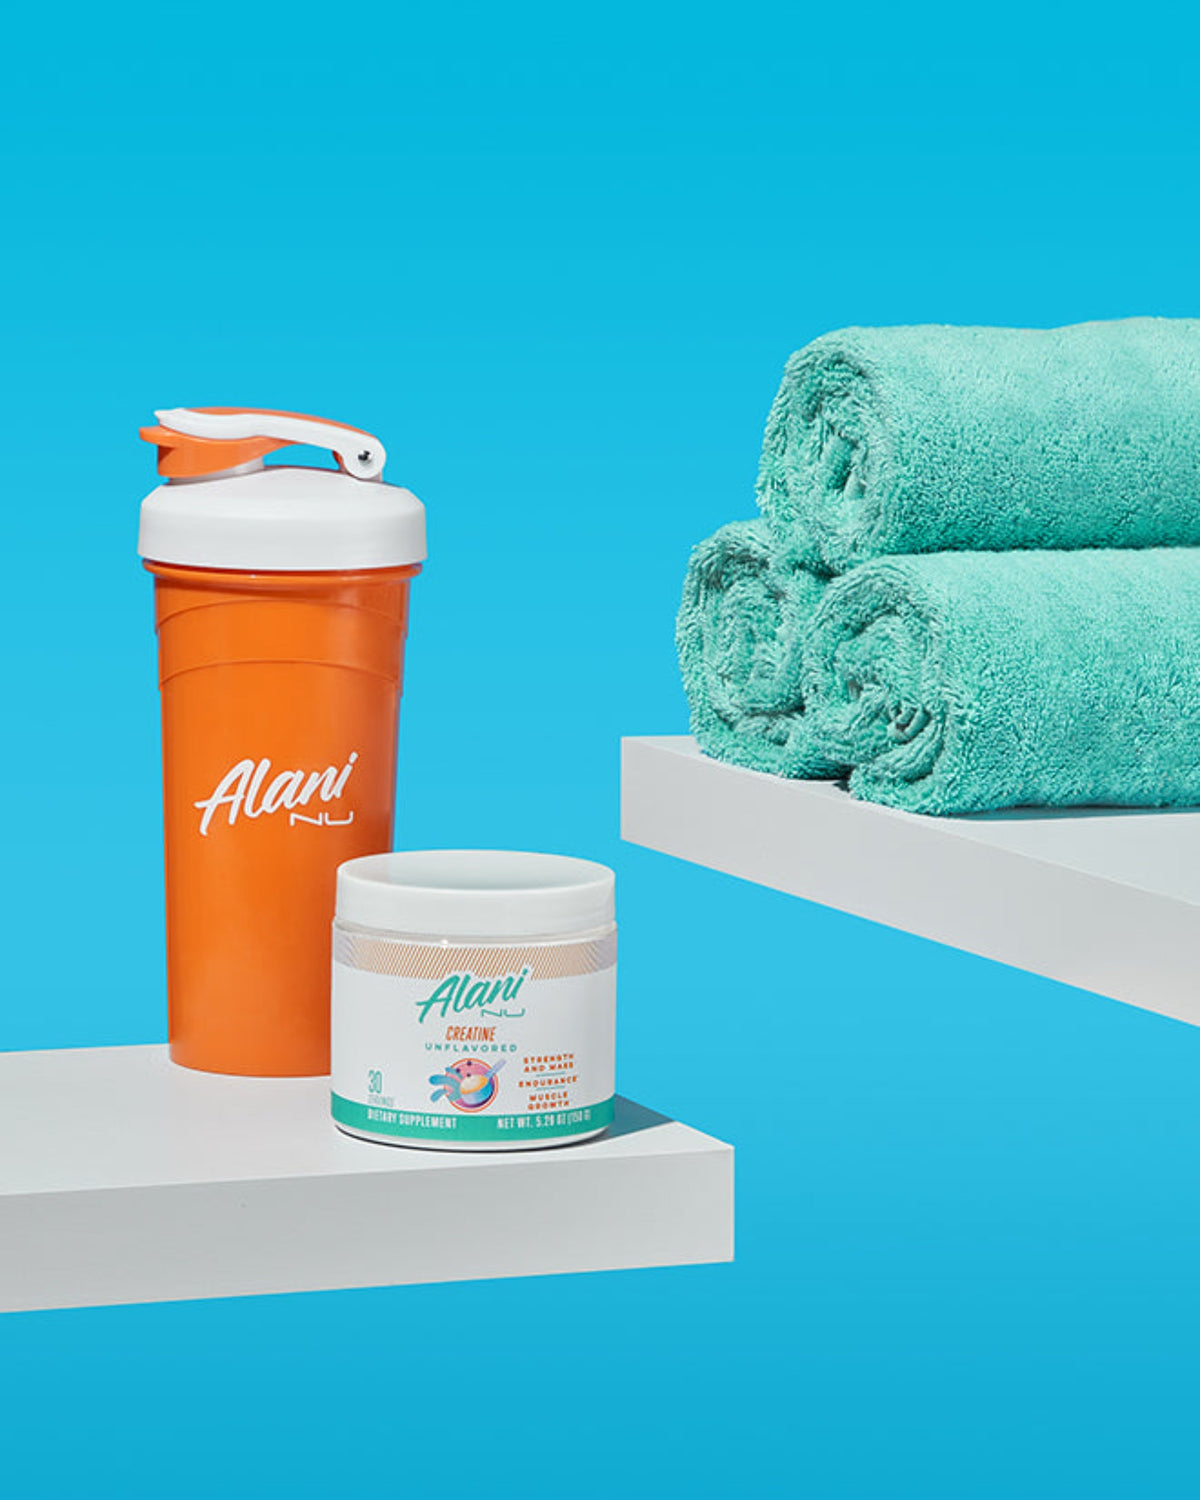 A Alani Nu Shaker sitting next to a Creatine container by a stack of towels. 